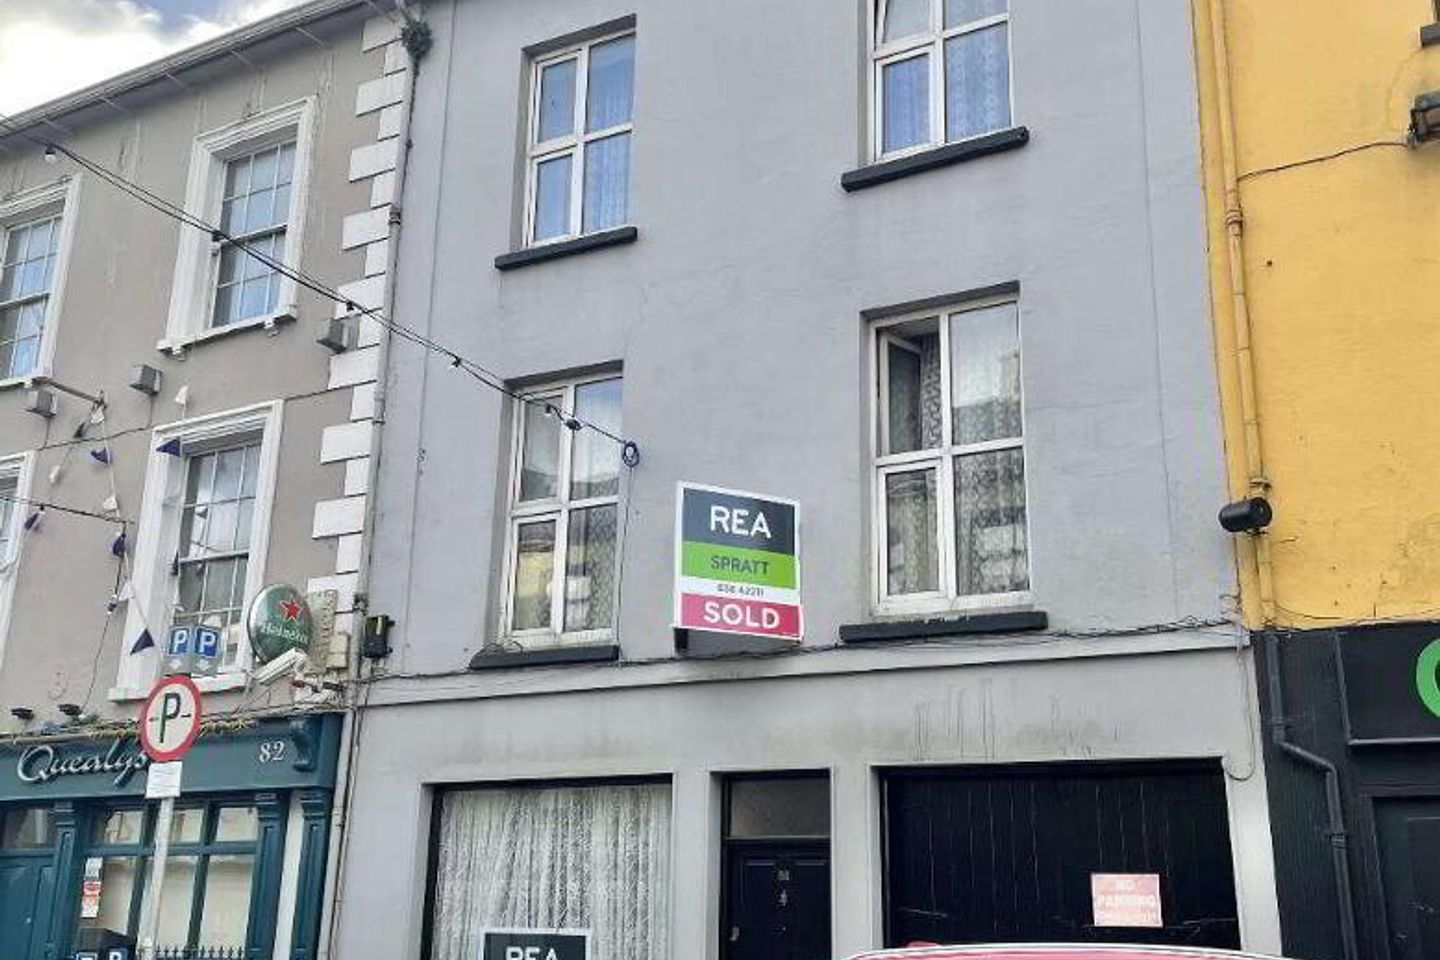 81 O'Connell Street, Dungarvan, Co. Waterford, X35XA09